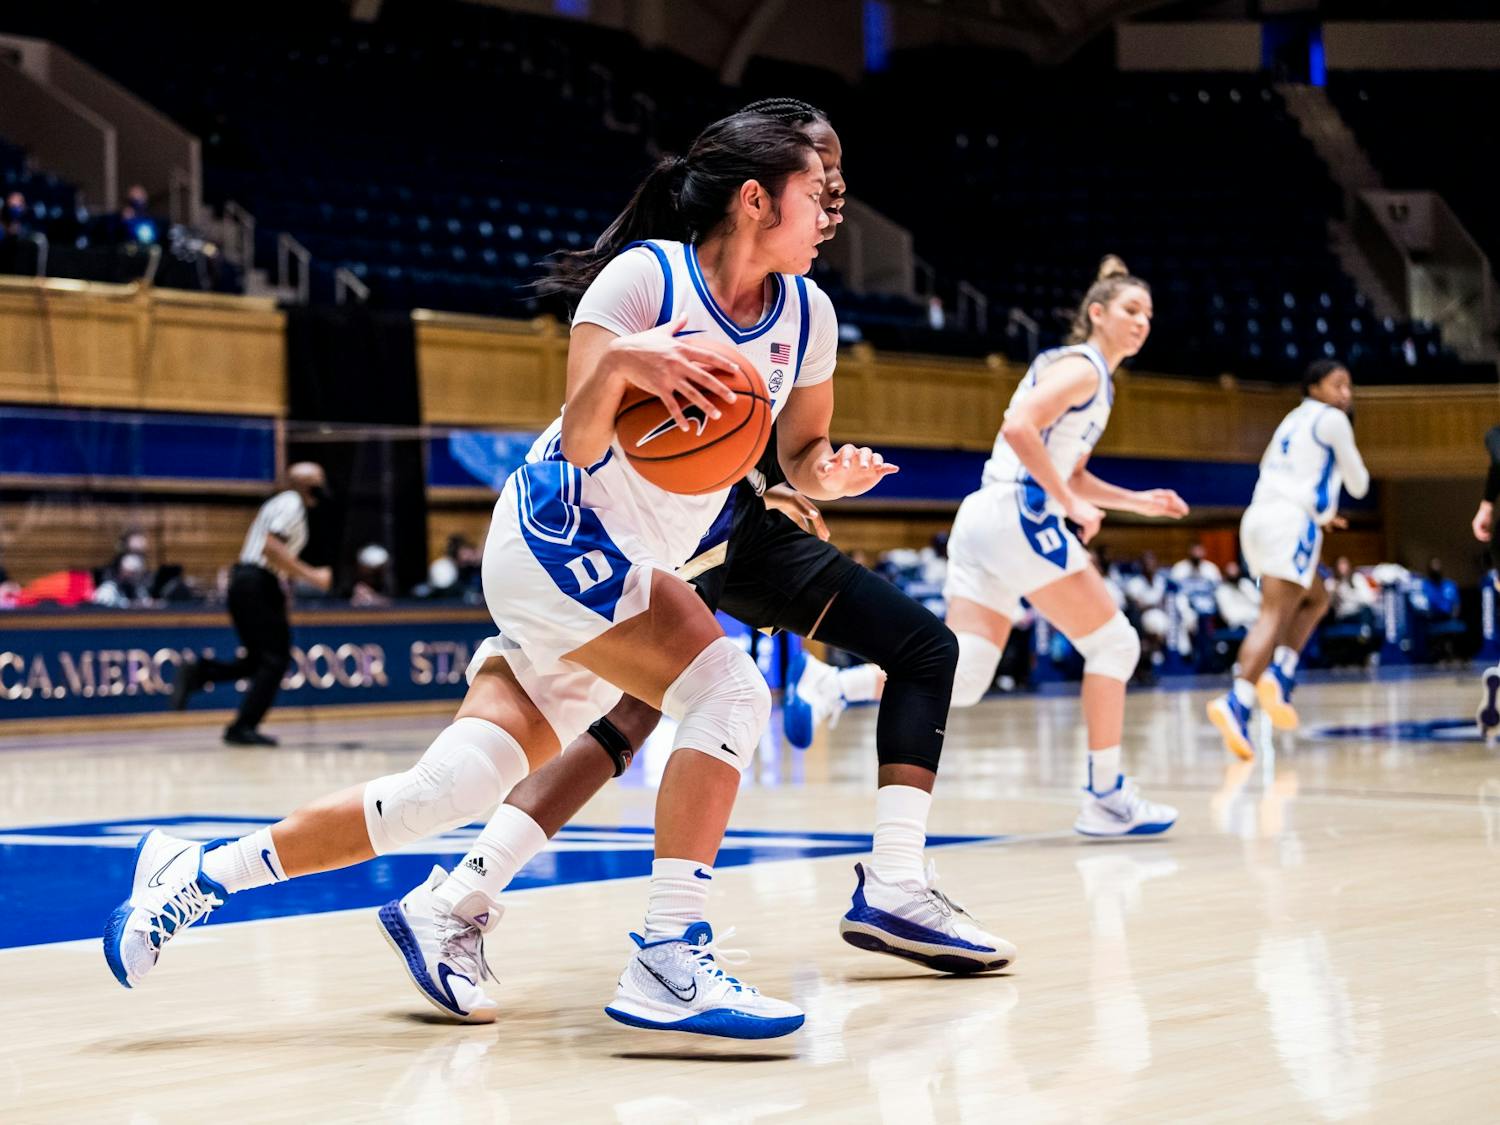 Sophomore Vanessa de Jesus averaged 12 points, 3.8 rebounds and 3.8 assists in the four games Duke played last year. 